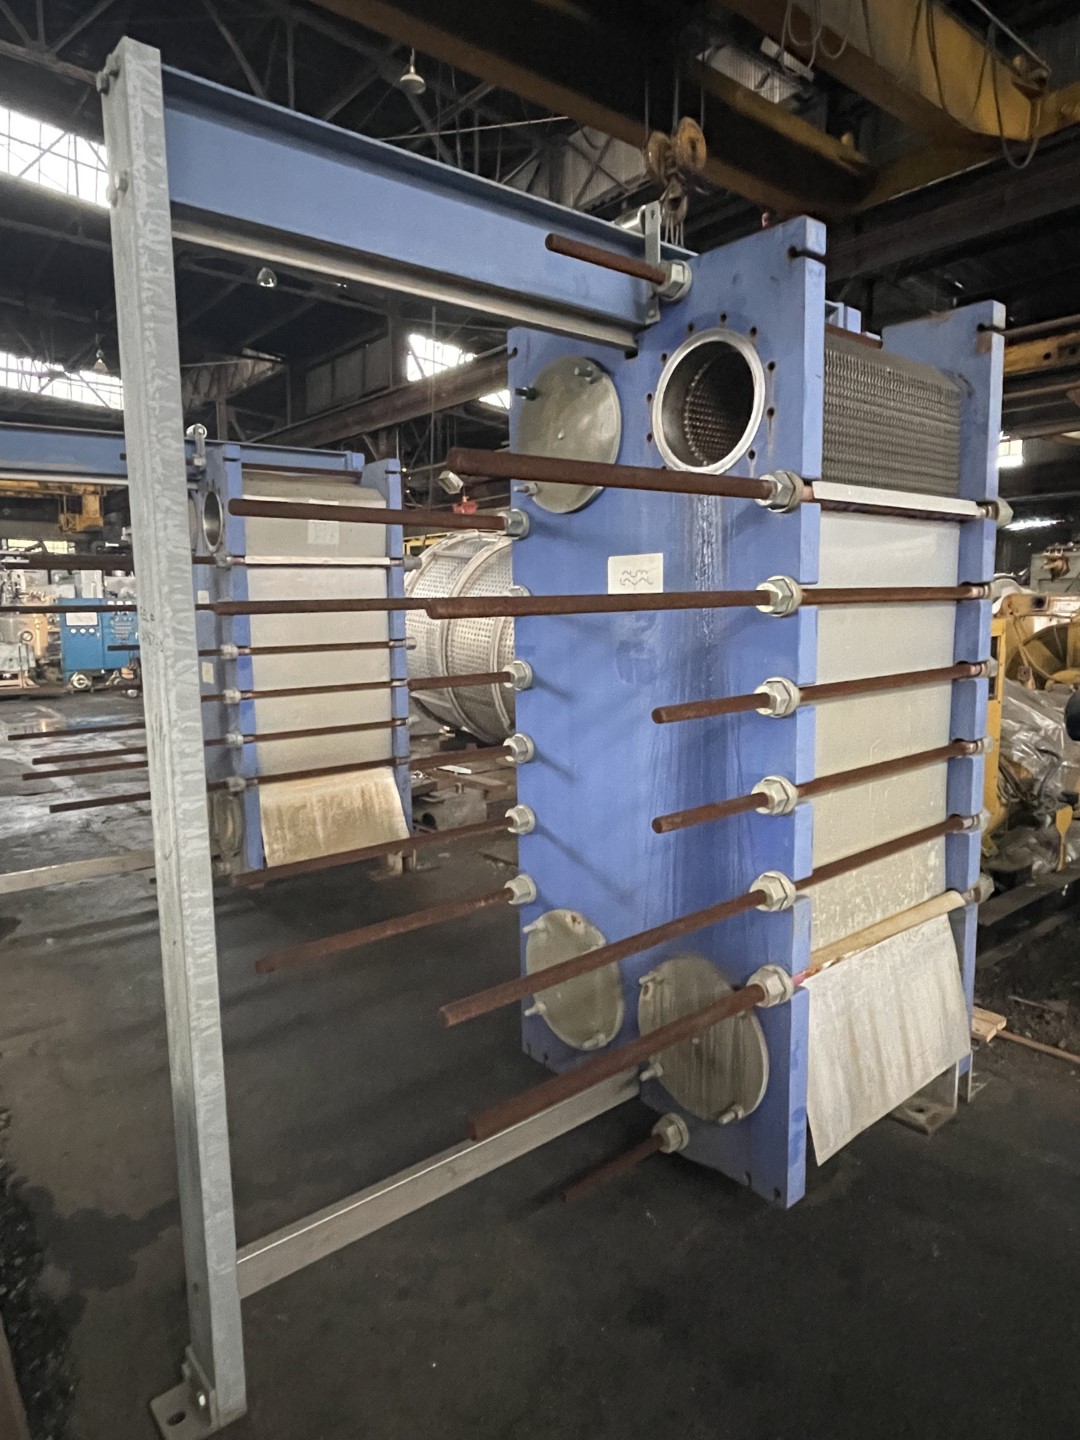 1,631 Sq Ft Alfa Laval Plate Heat Exchanger, S/S